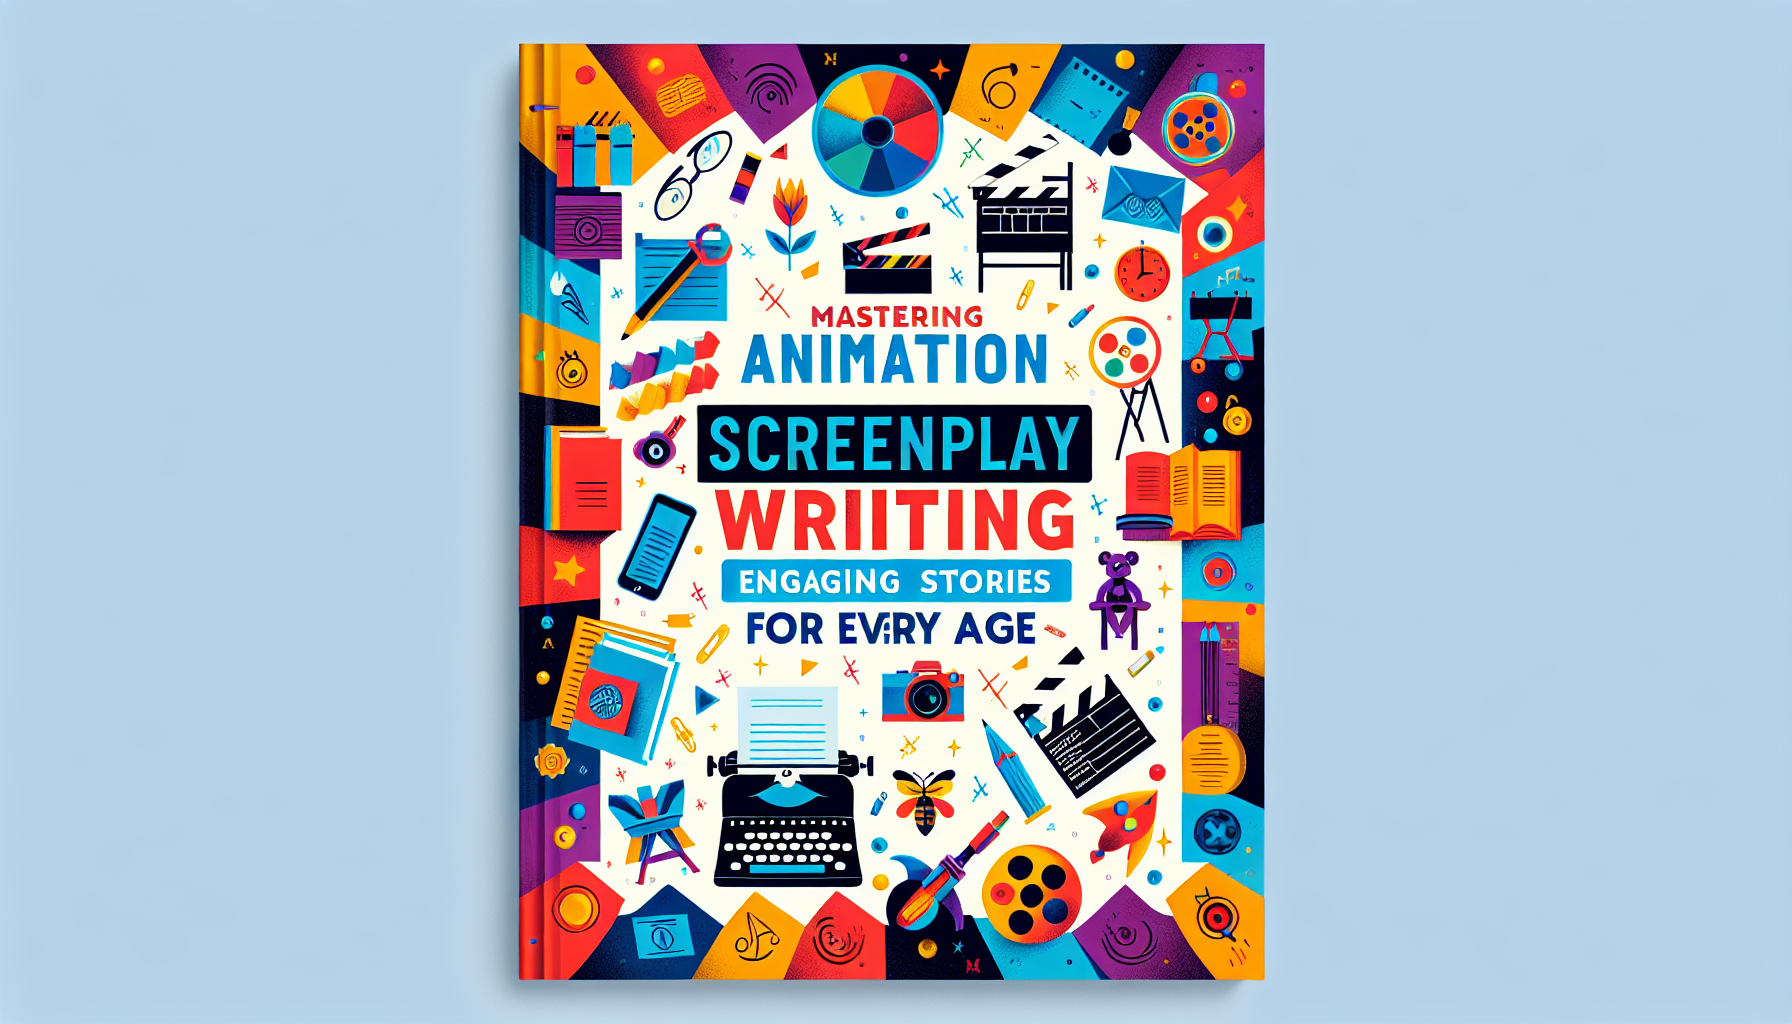 Create an image of a colorful, modern cover entitled 'Mastering Animation Screenplay Writing: Engaging Stories for Every Age'. The cover should exhibit symbols related to animation and screenplay writing, such as a typewriter, animation frames, a director's chair, and a film reel. Please make it vibrant and engaging, attracting the eye with a variety of colors. Remember, no words are to appear apart from the title itself.